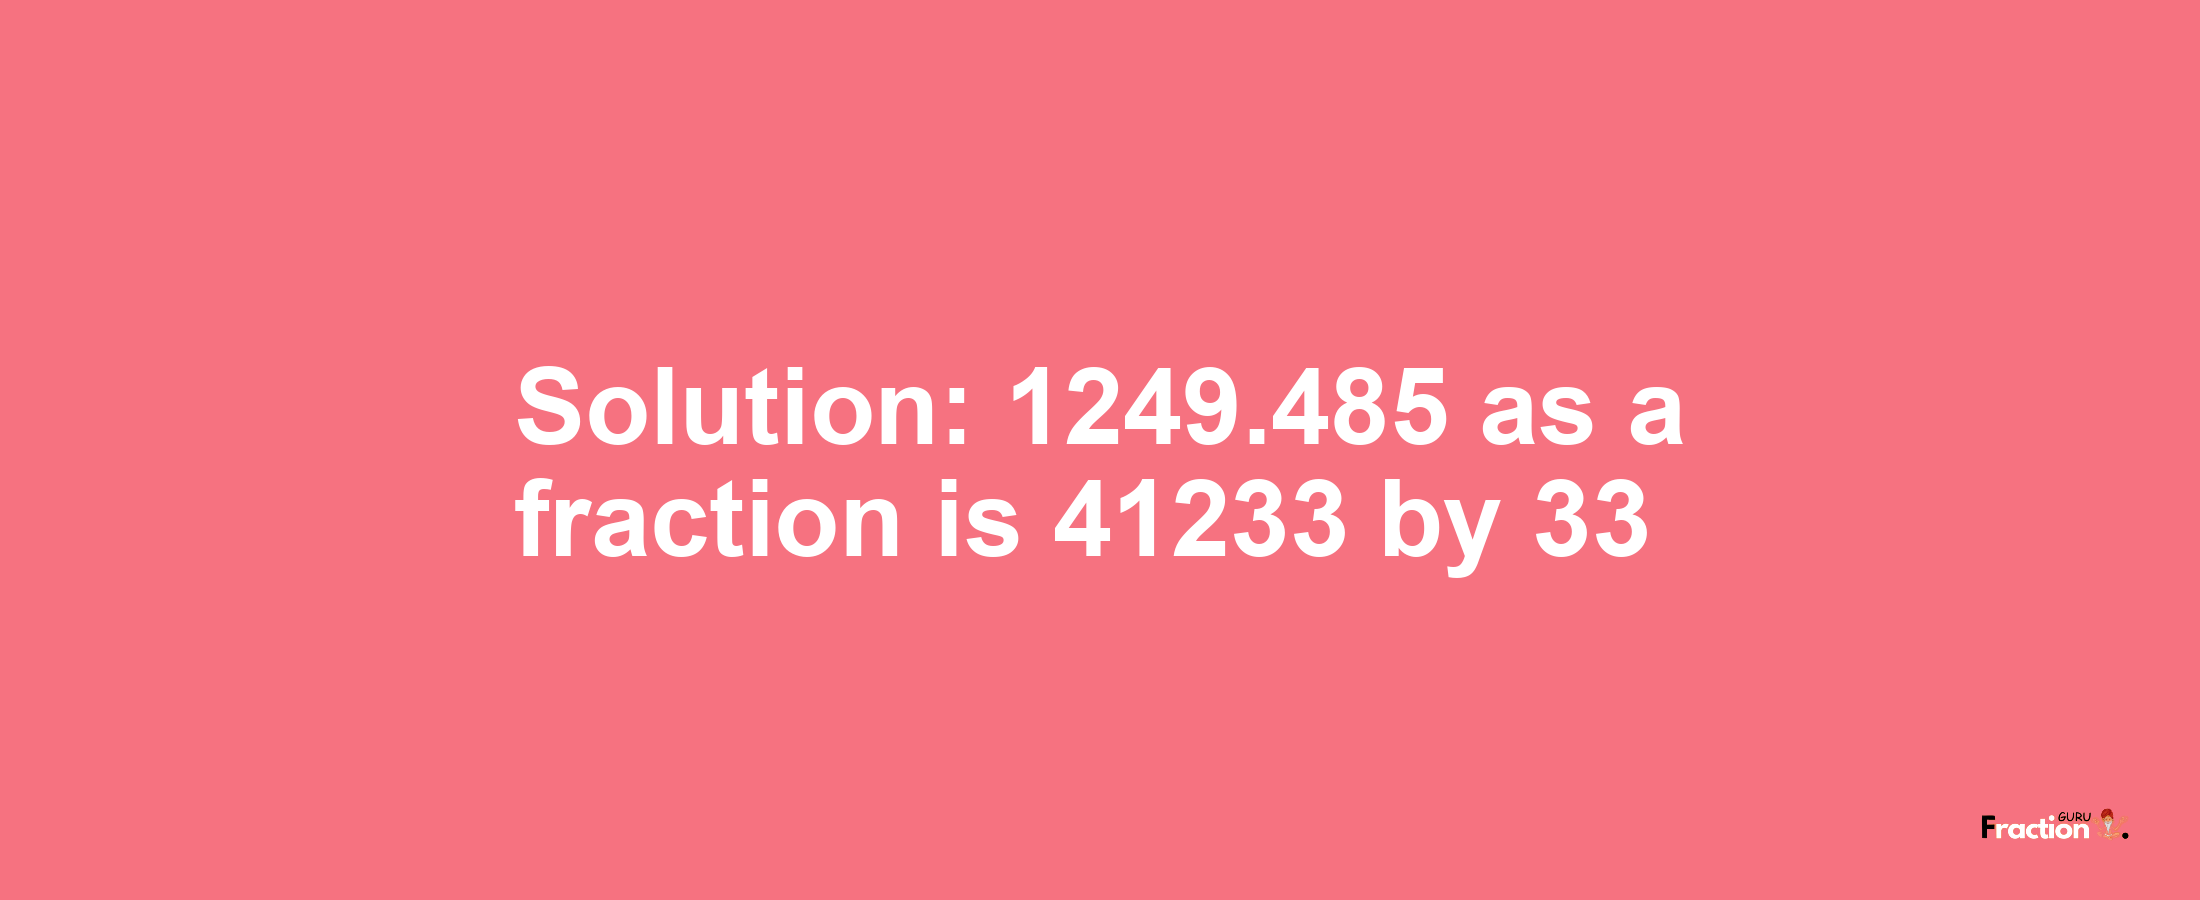 Solution:1249.485 as a fraction is 41233/33